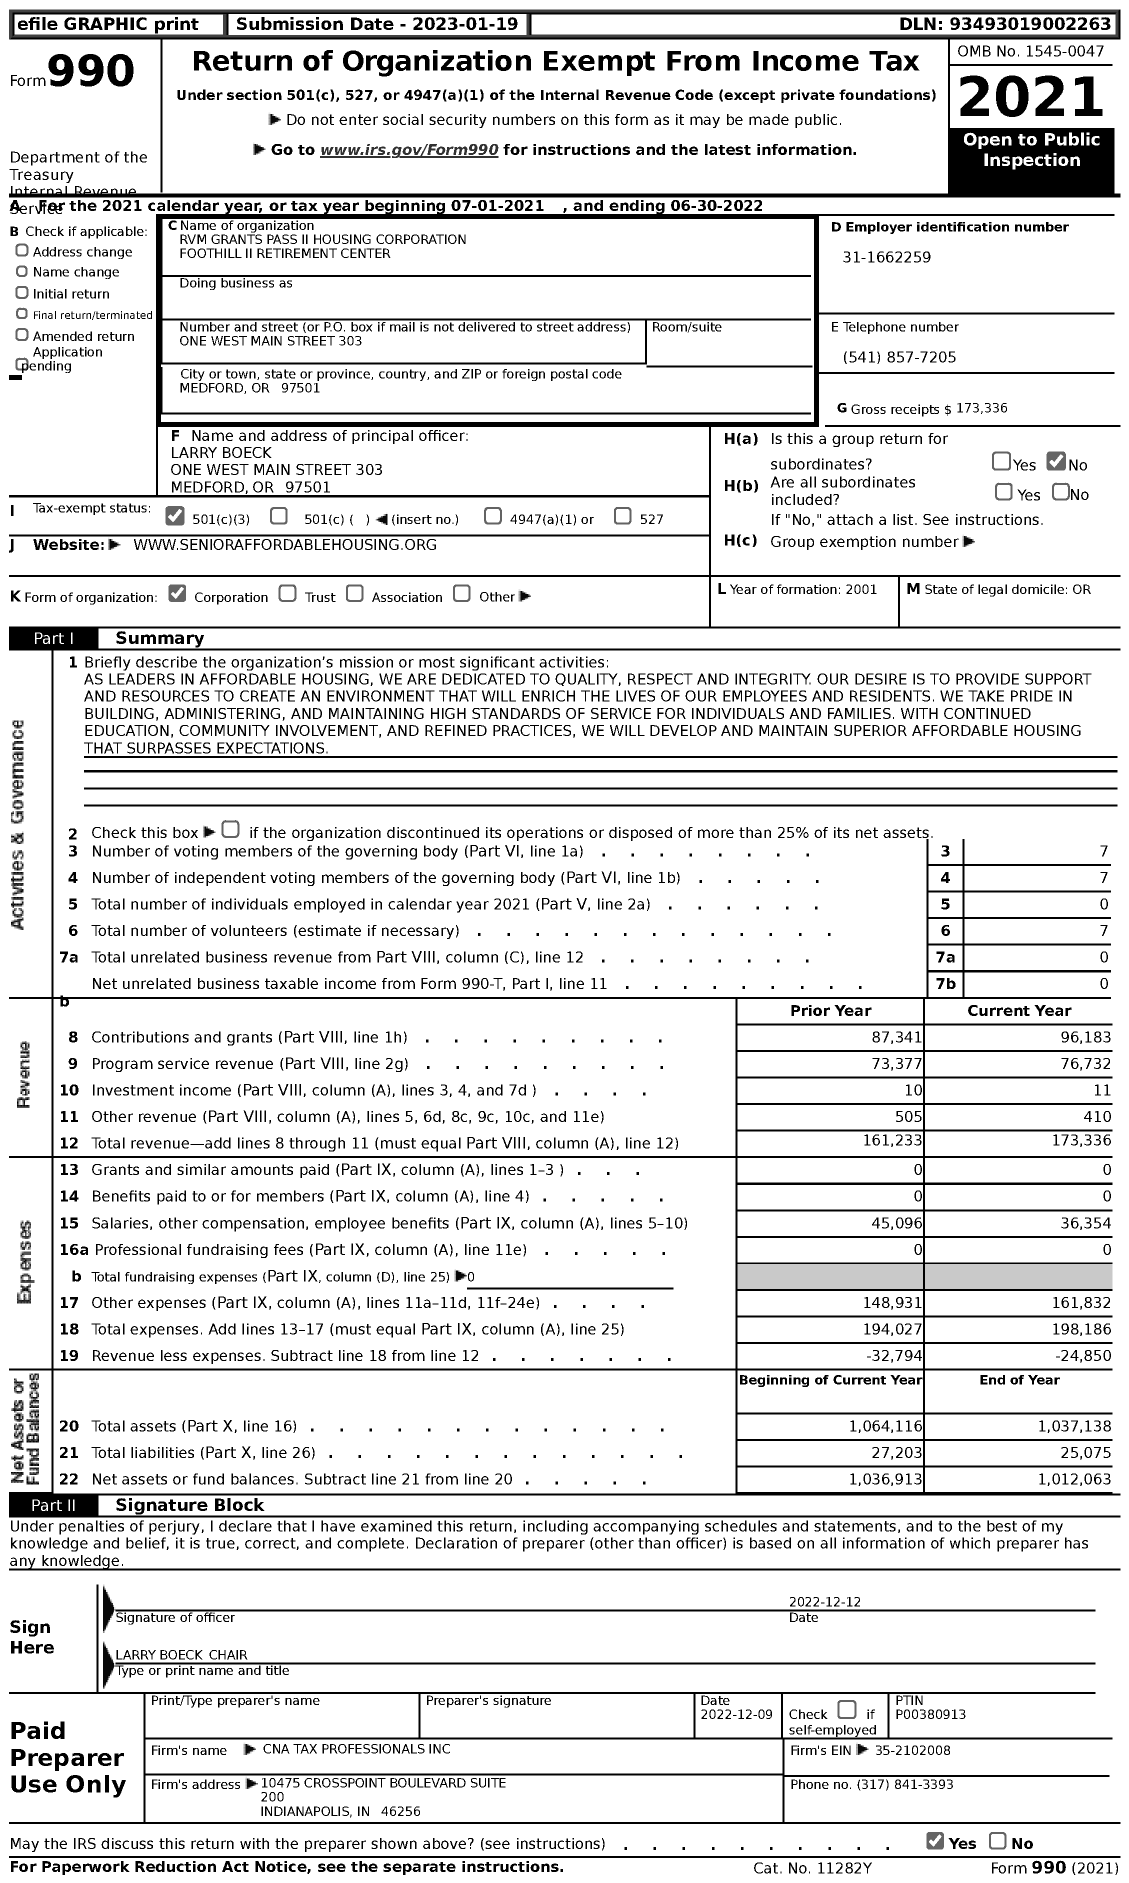 Image of first page of 2021 Form 990 for RVM Grants Pass II Housing Corporation Foothill II Retirement Center